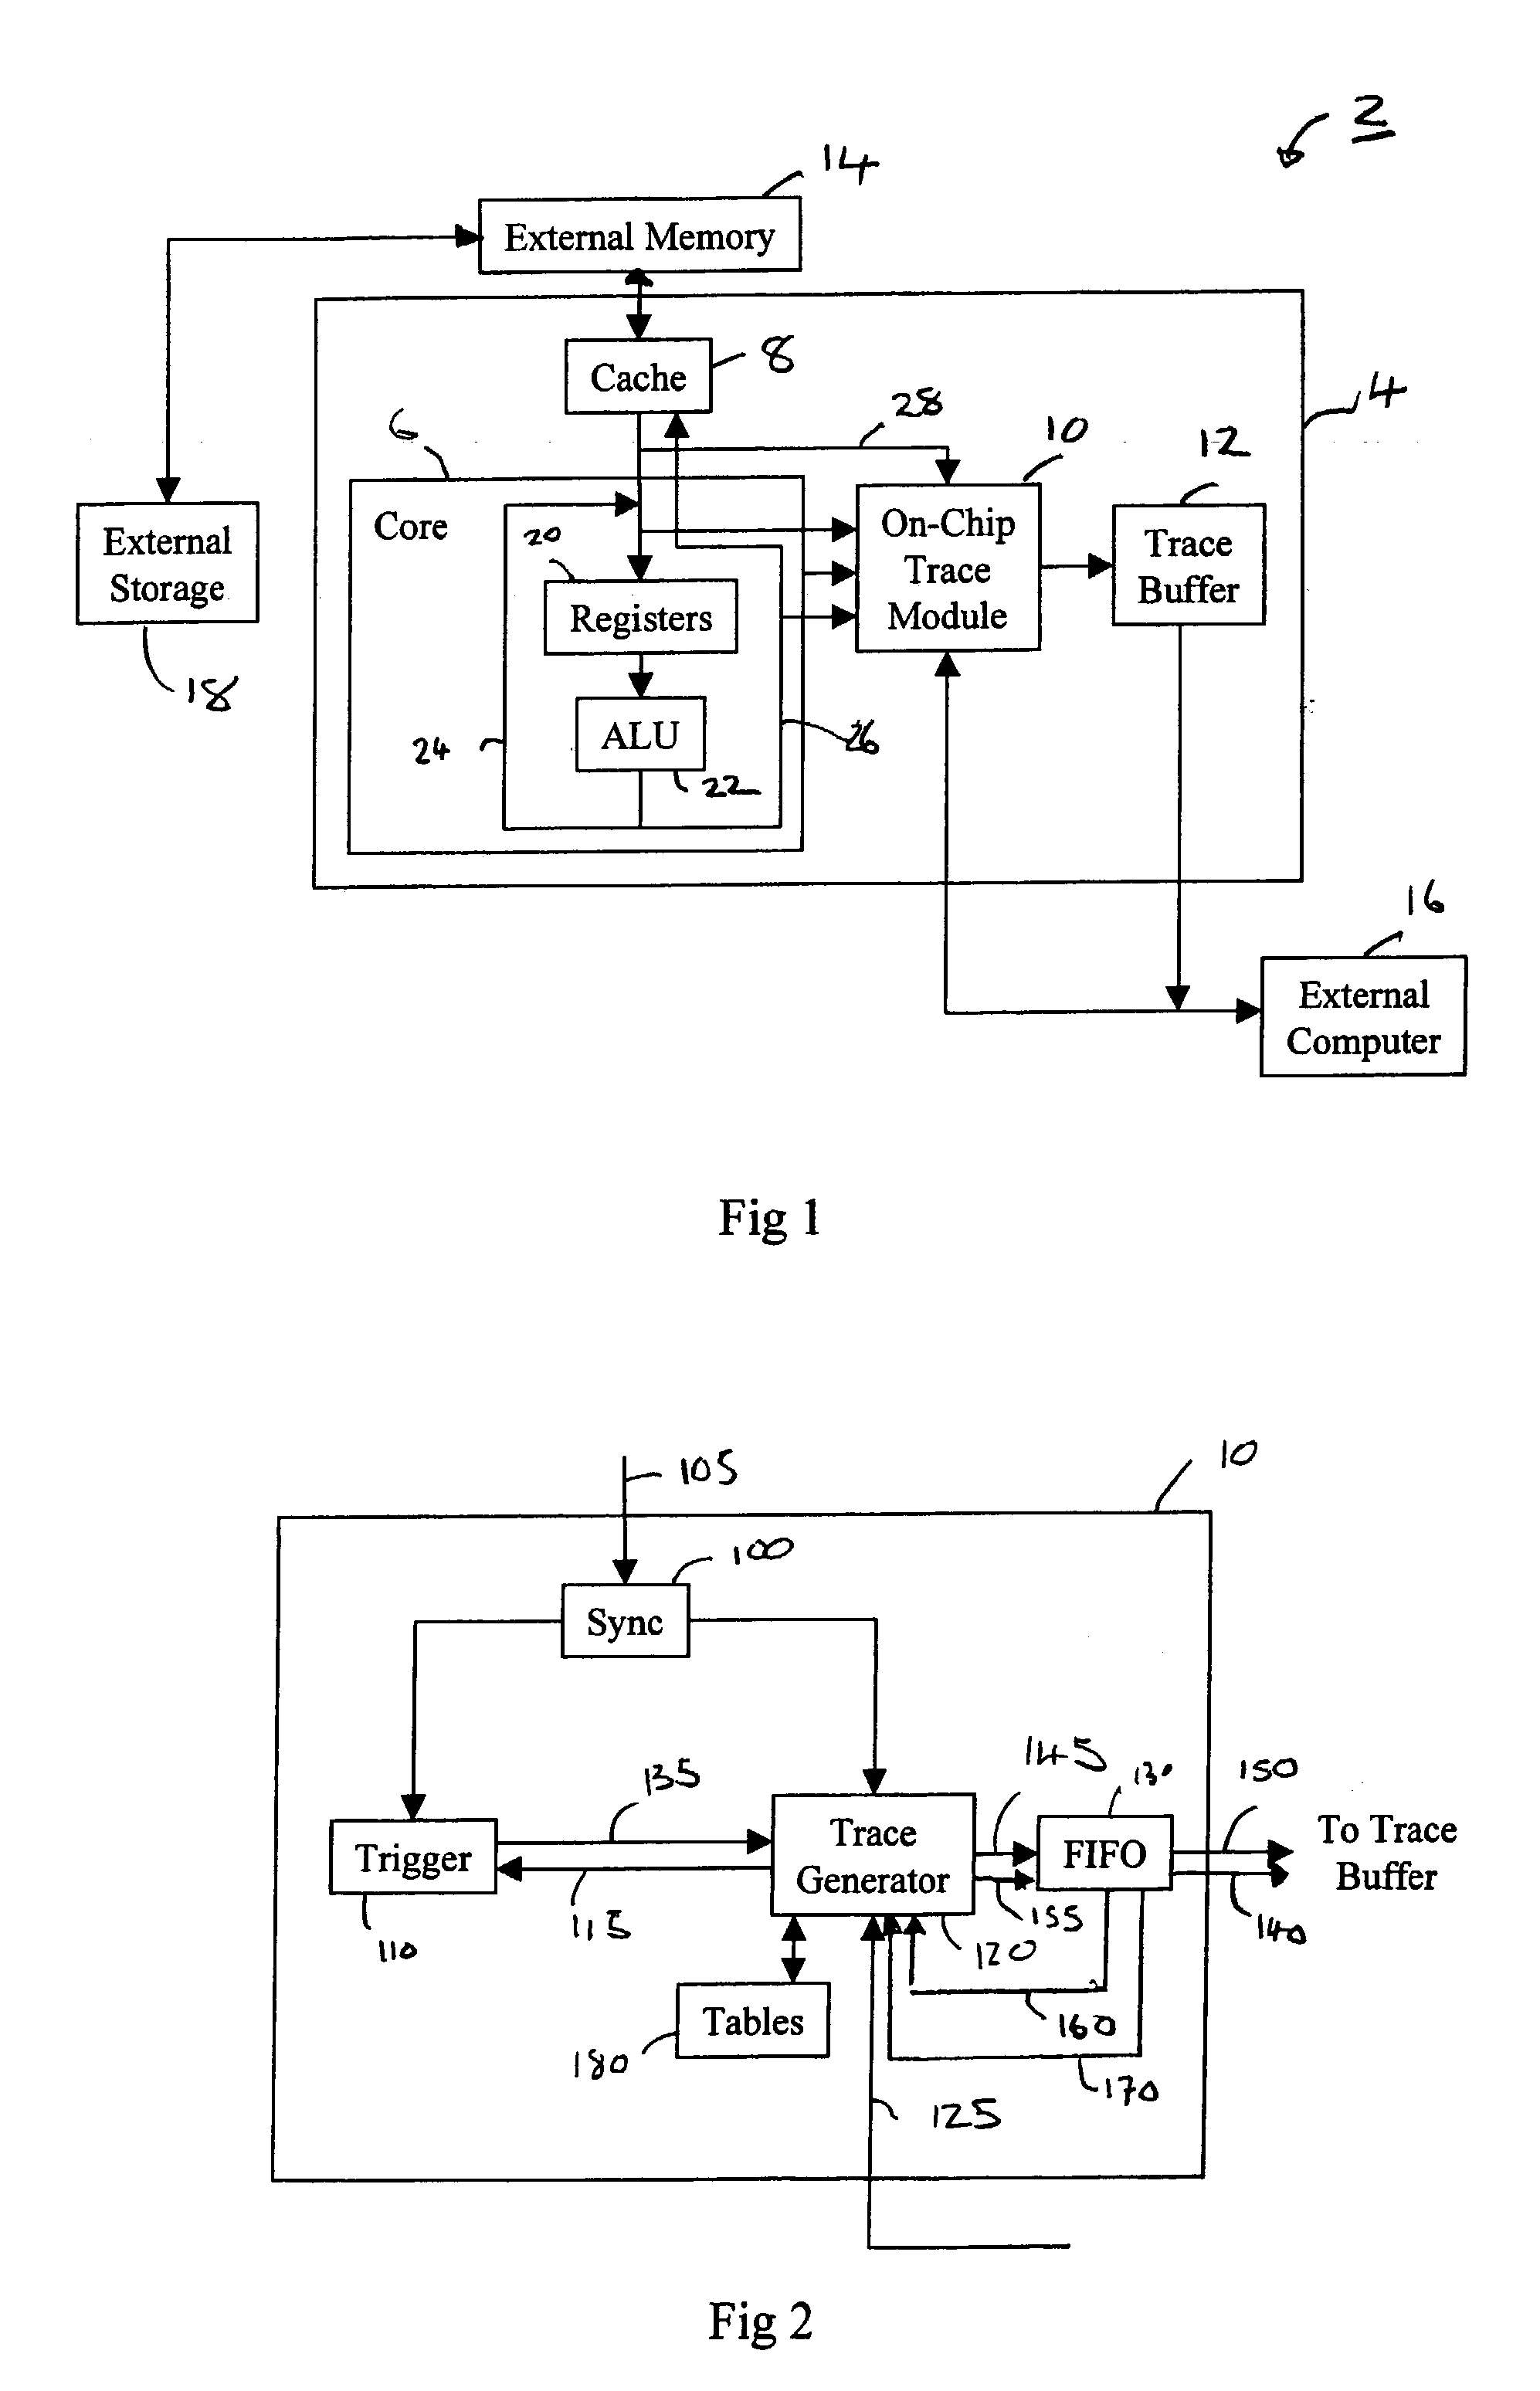 Generation of trace elements within a data processing apparatus